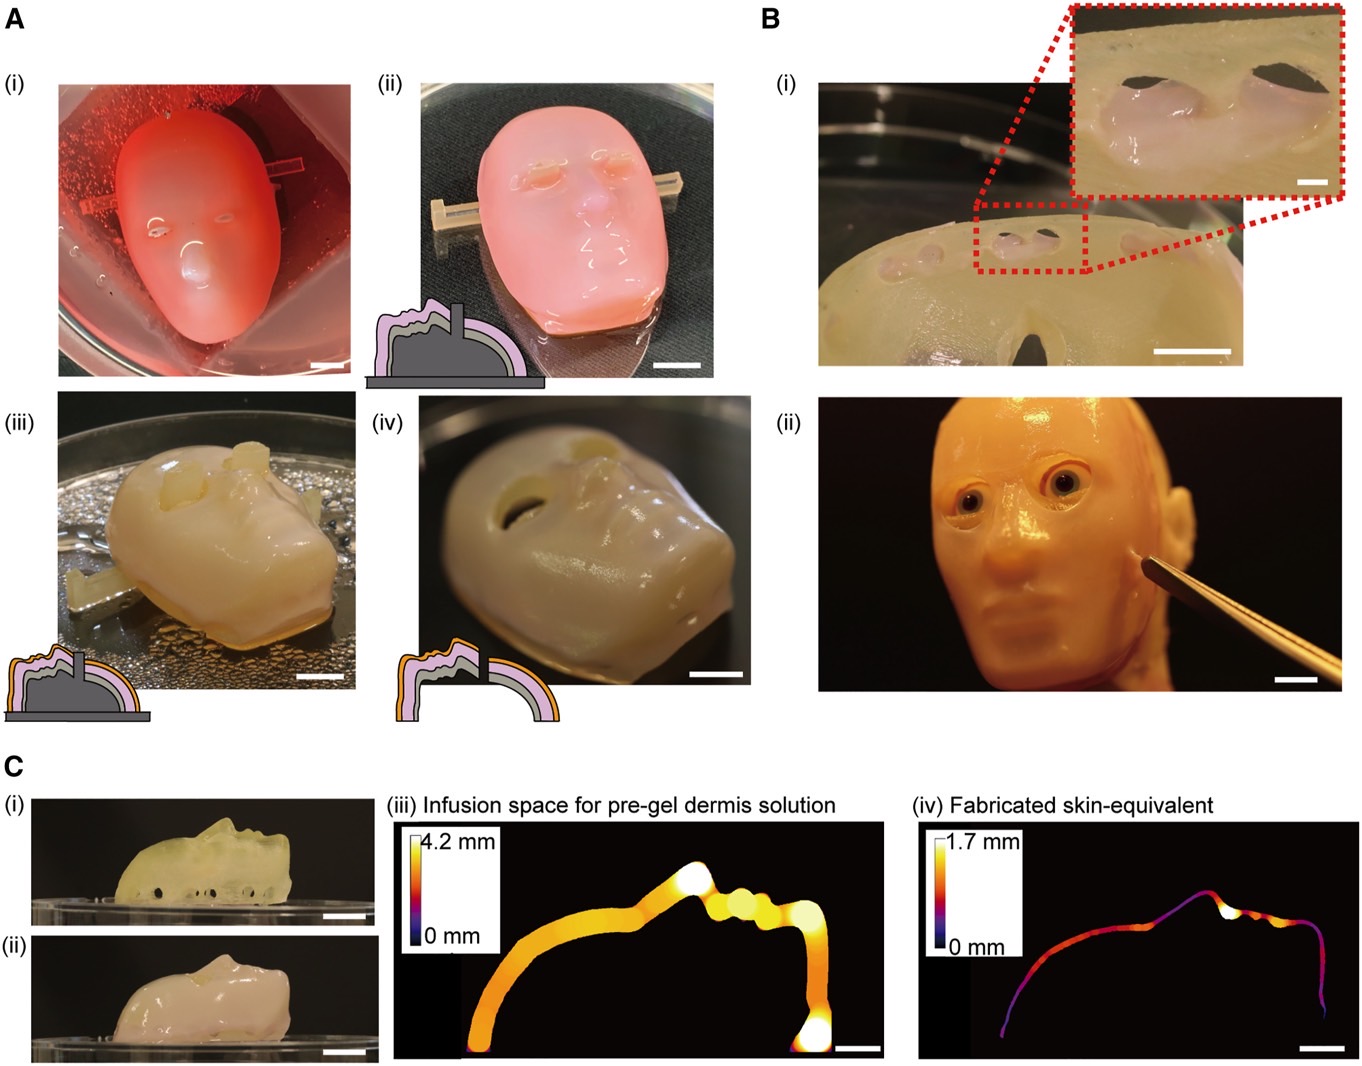 University of Tokyo's artificial human skin adhering to the face of a robot.